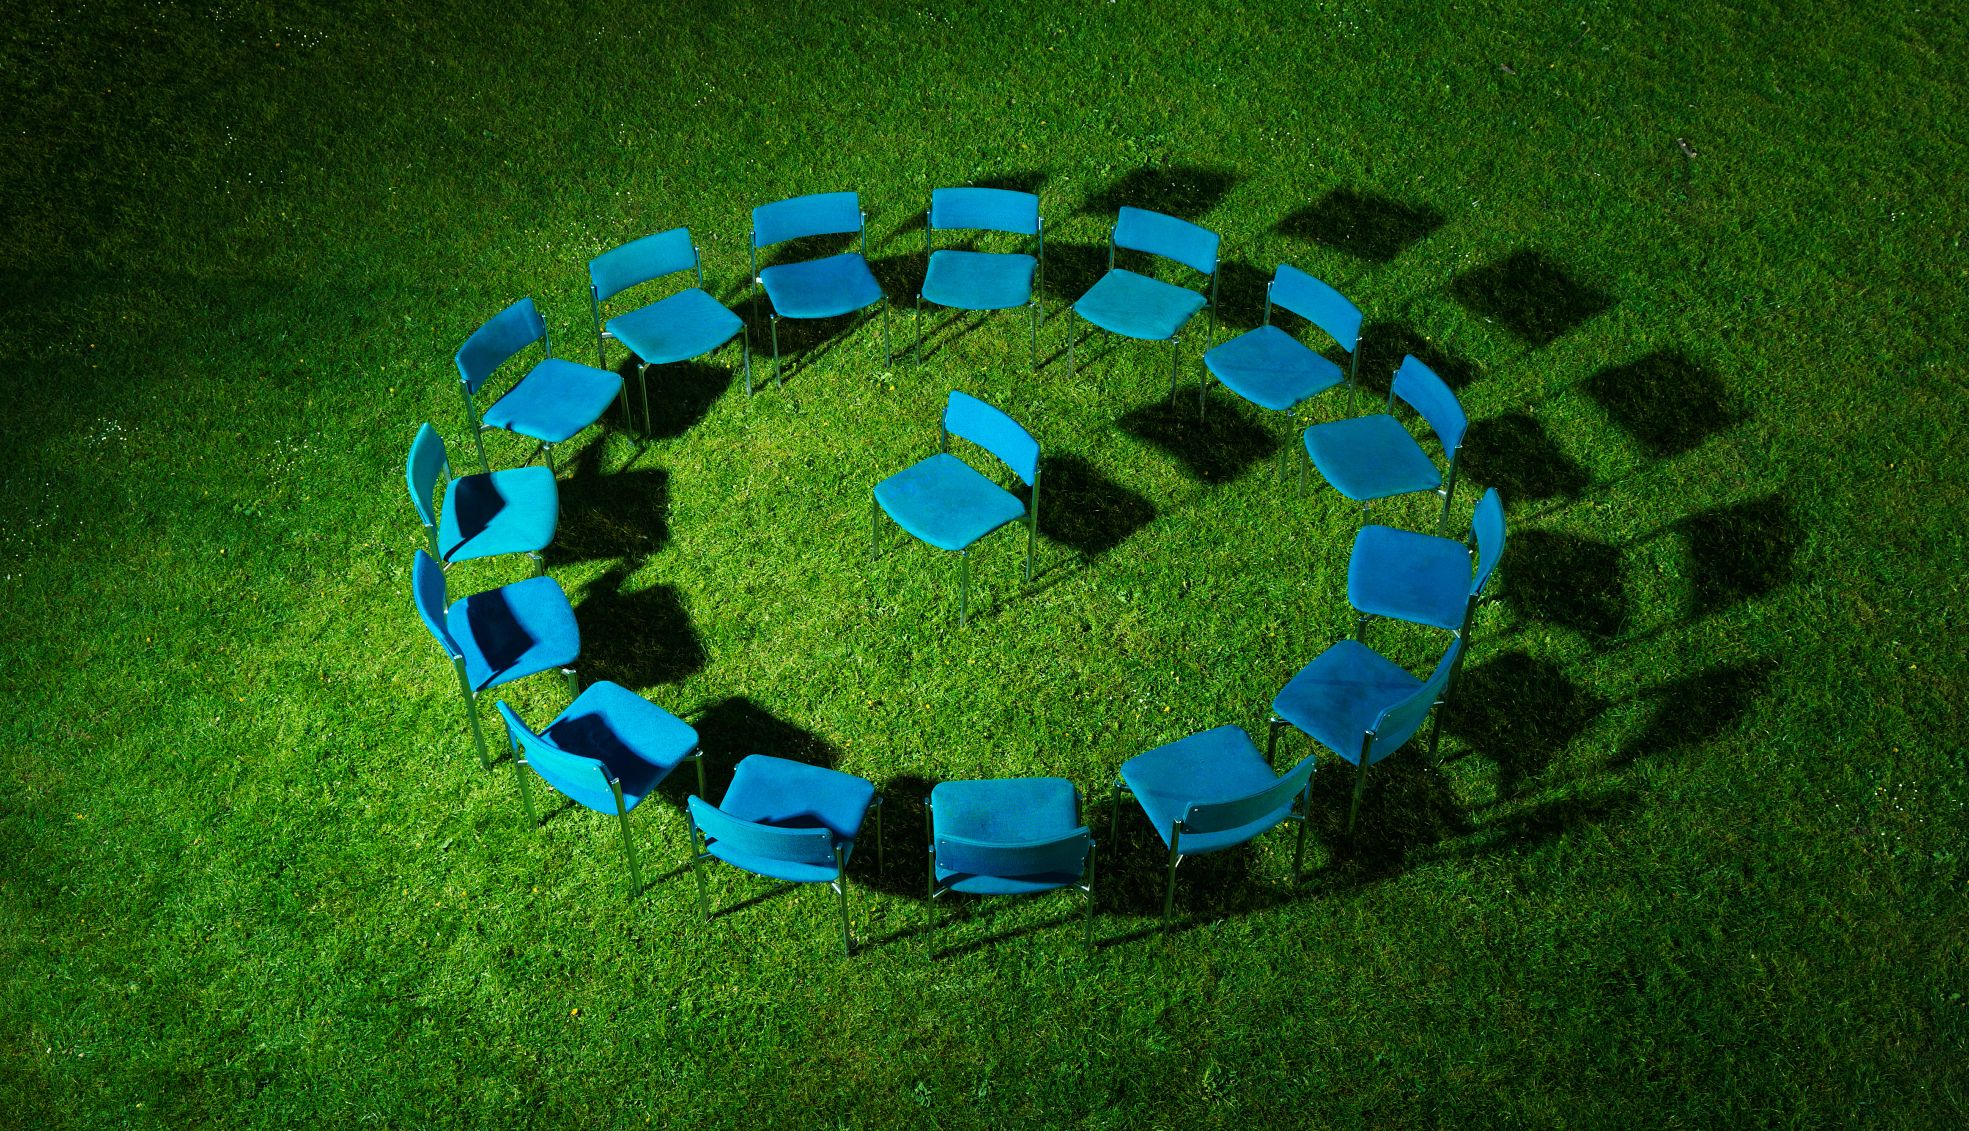 circle of blue chairs on green grass field, one chair in centre, elevated view